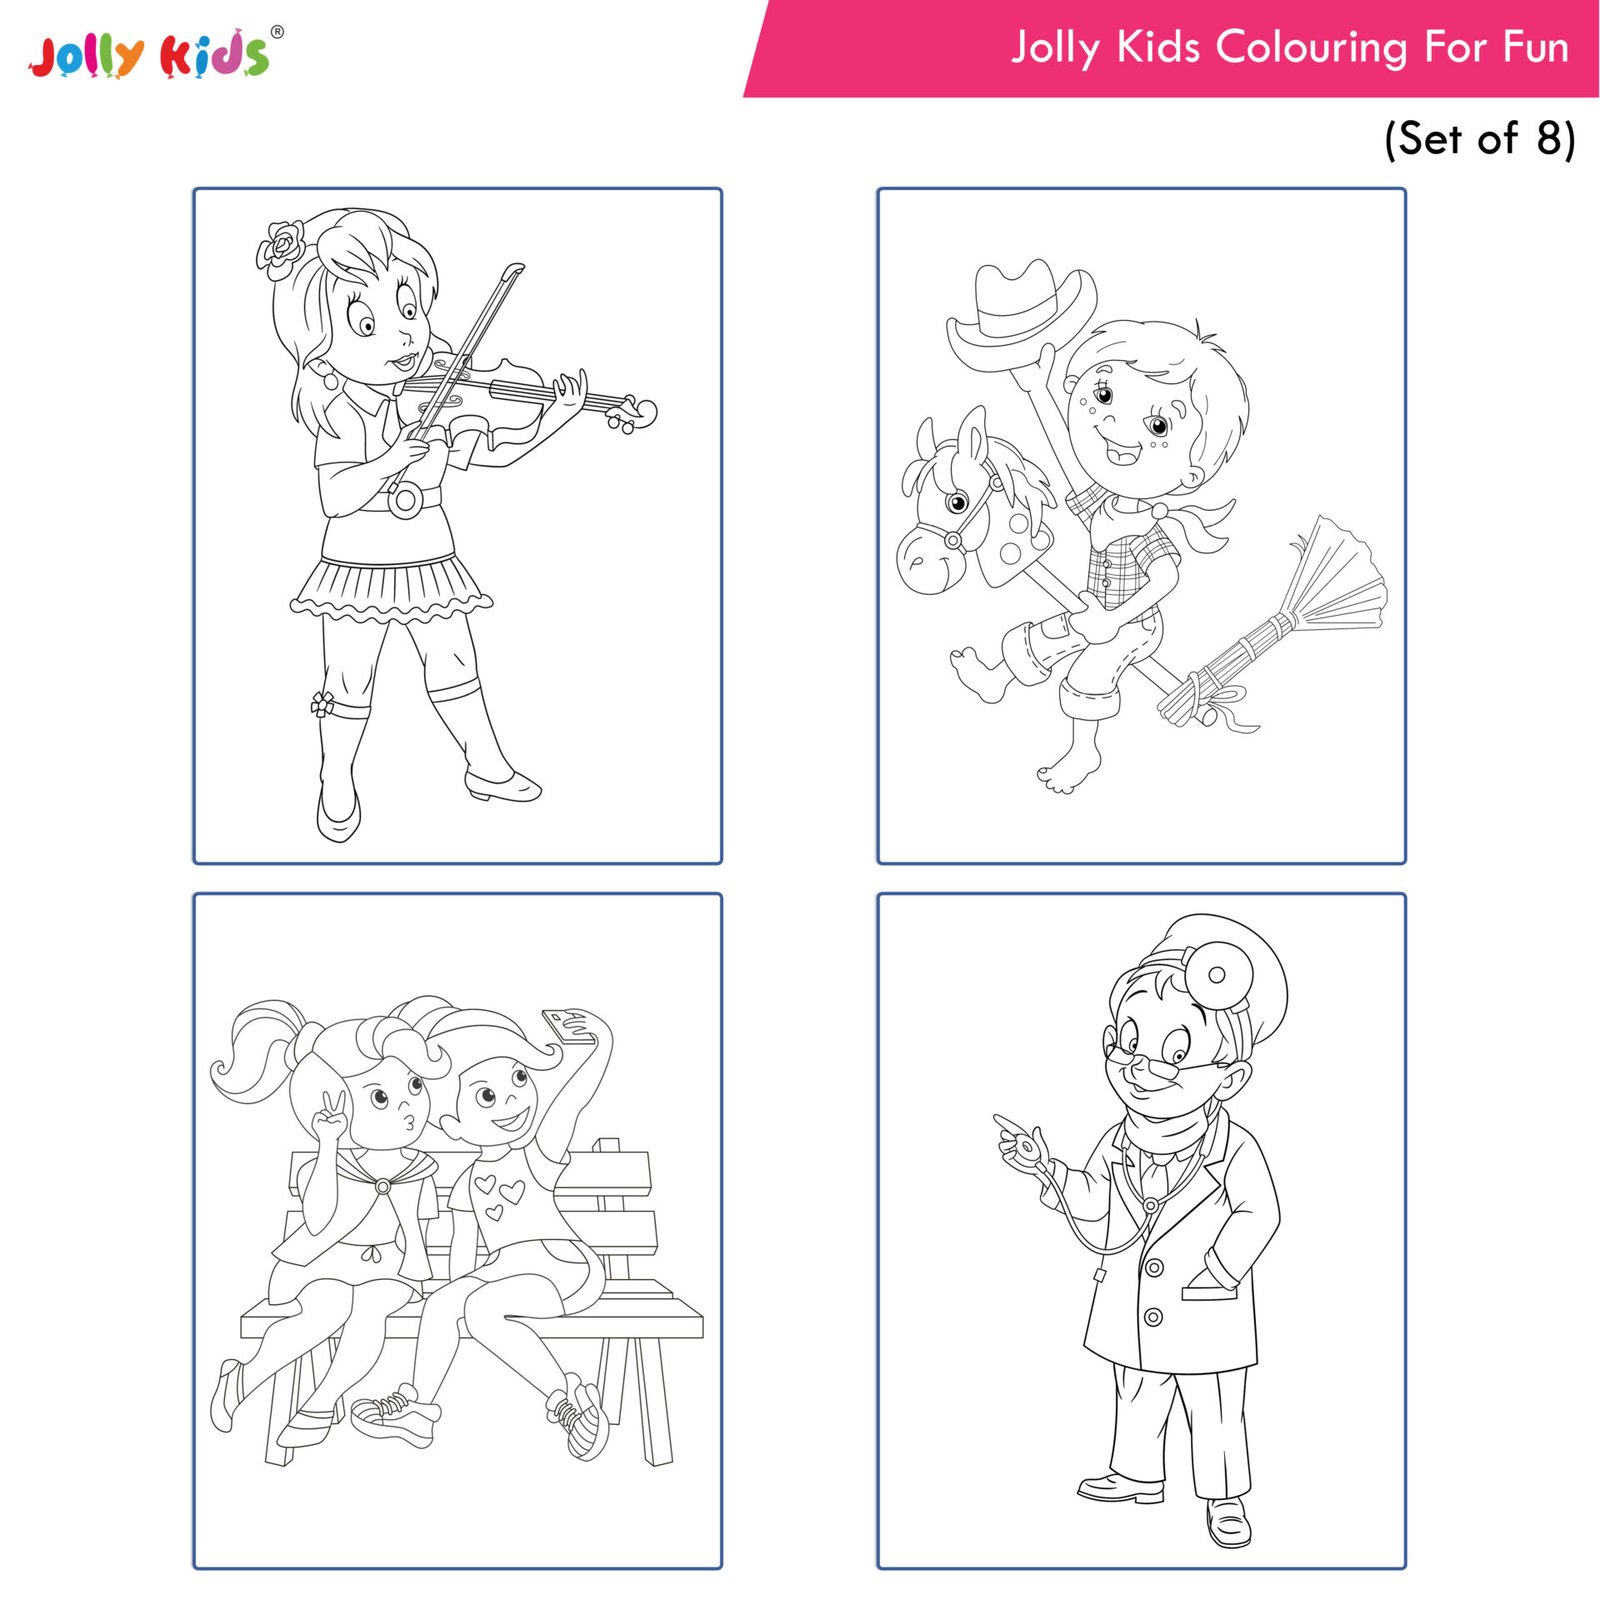 Jolly Kids Colouring For Fun Book Set of 8 7